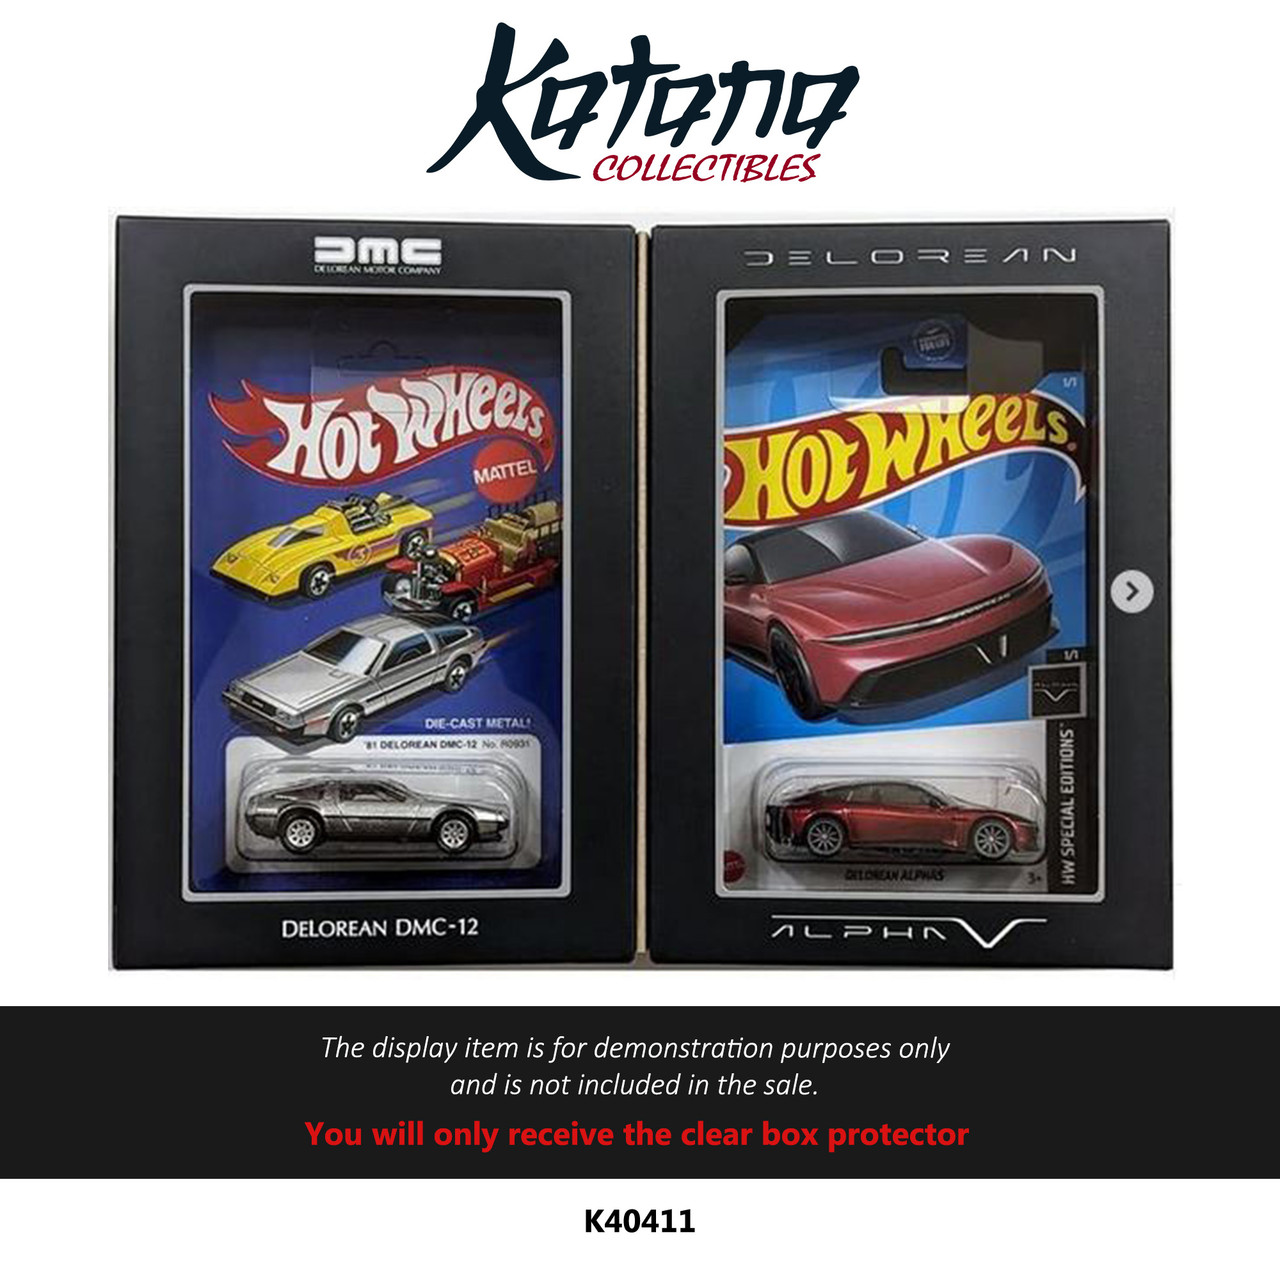 Katana Collectibles Protector For Hot Wheels Delorean Mattel Creations Two Pack